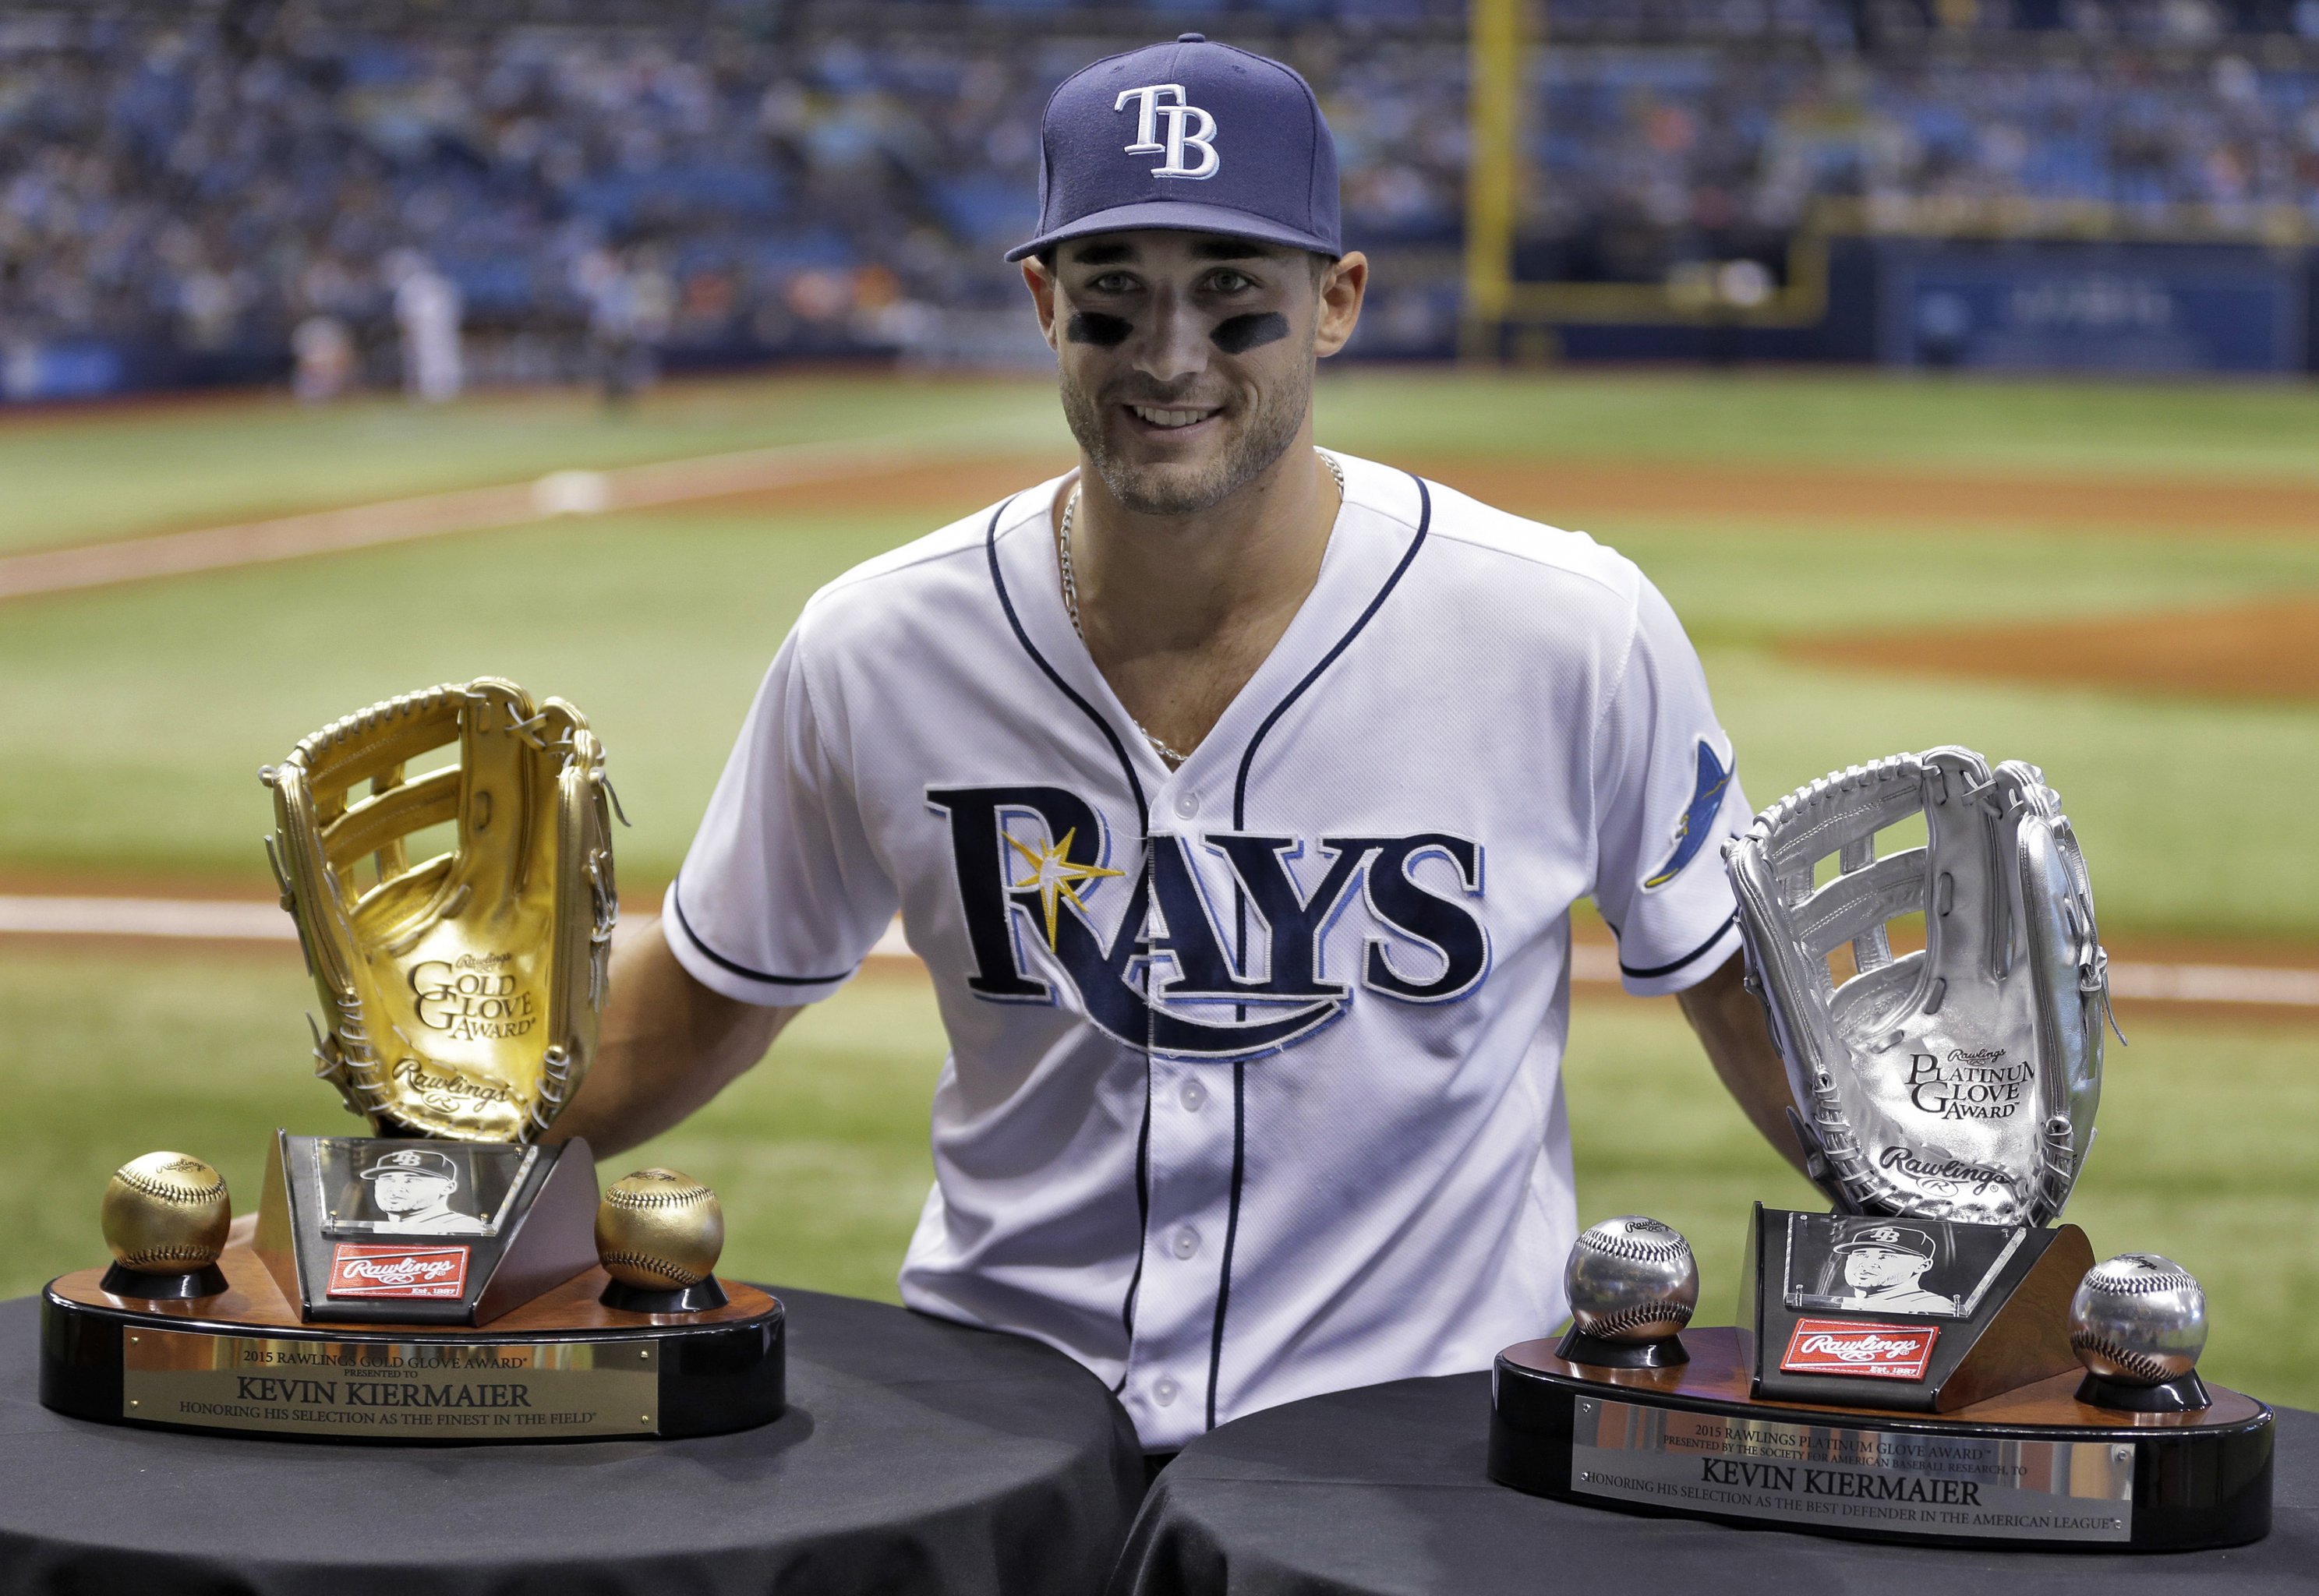 2013 MLB Prospect Review: Kevin Kiermaier, OF, Tampa Bay Rays